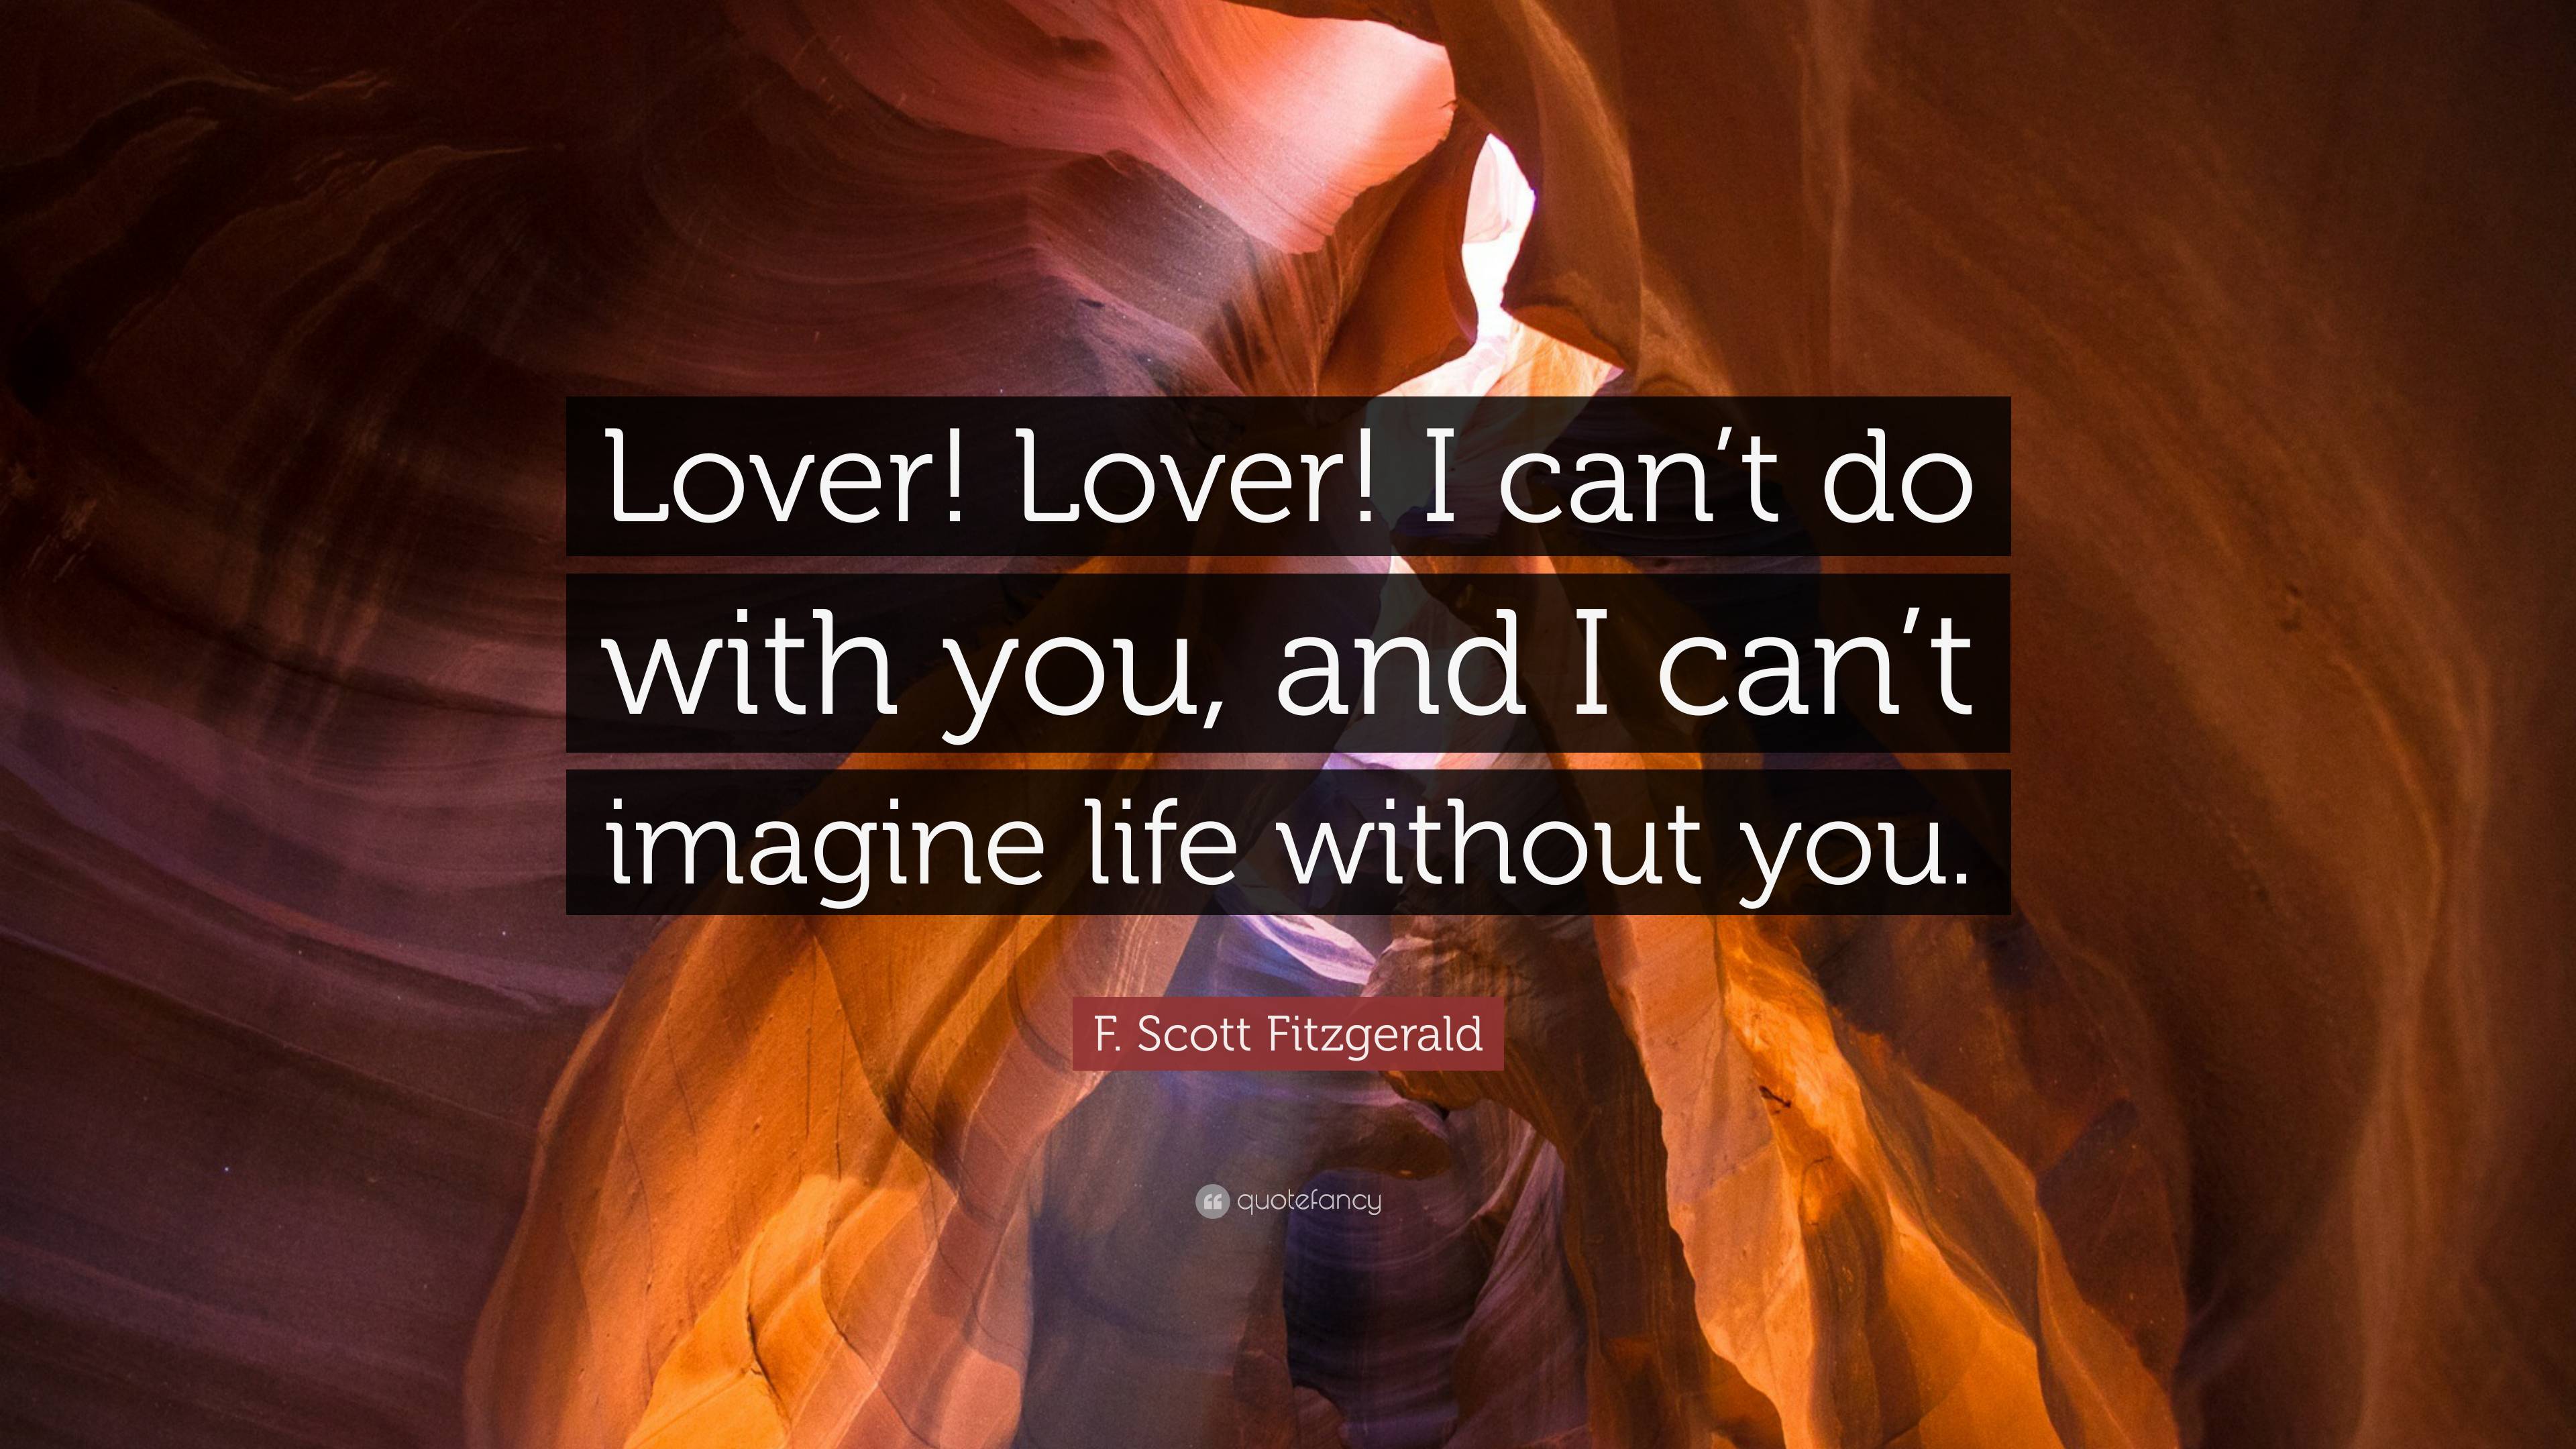 F. Scott Fitzgerald Quote: “Lover! Lover! I can’t do with you, and I ...